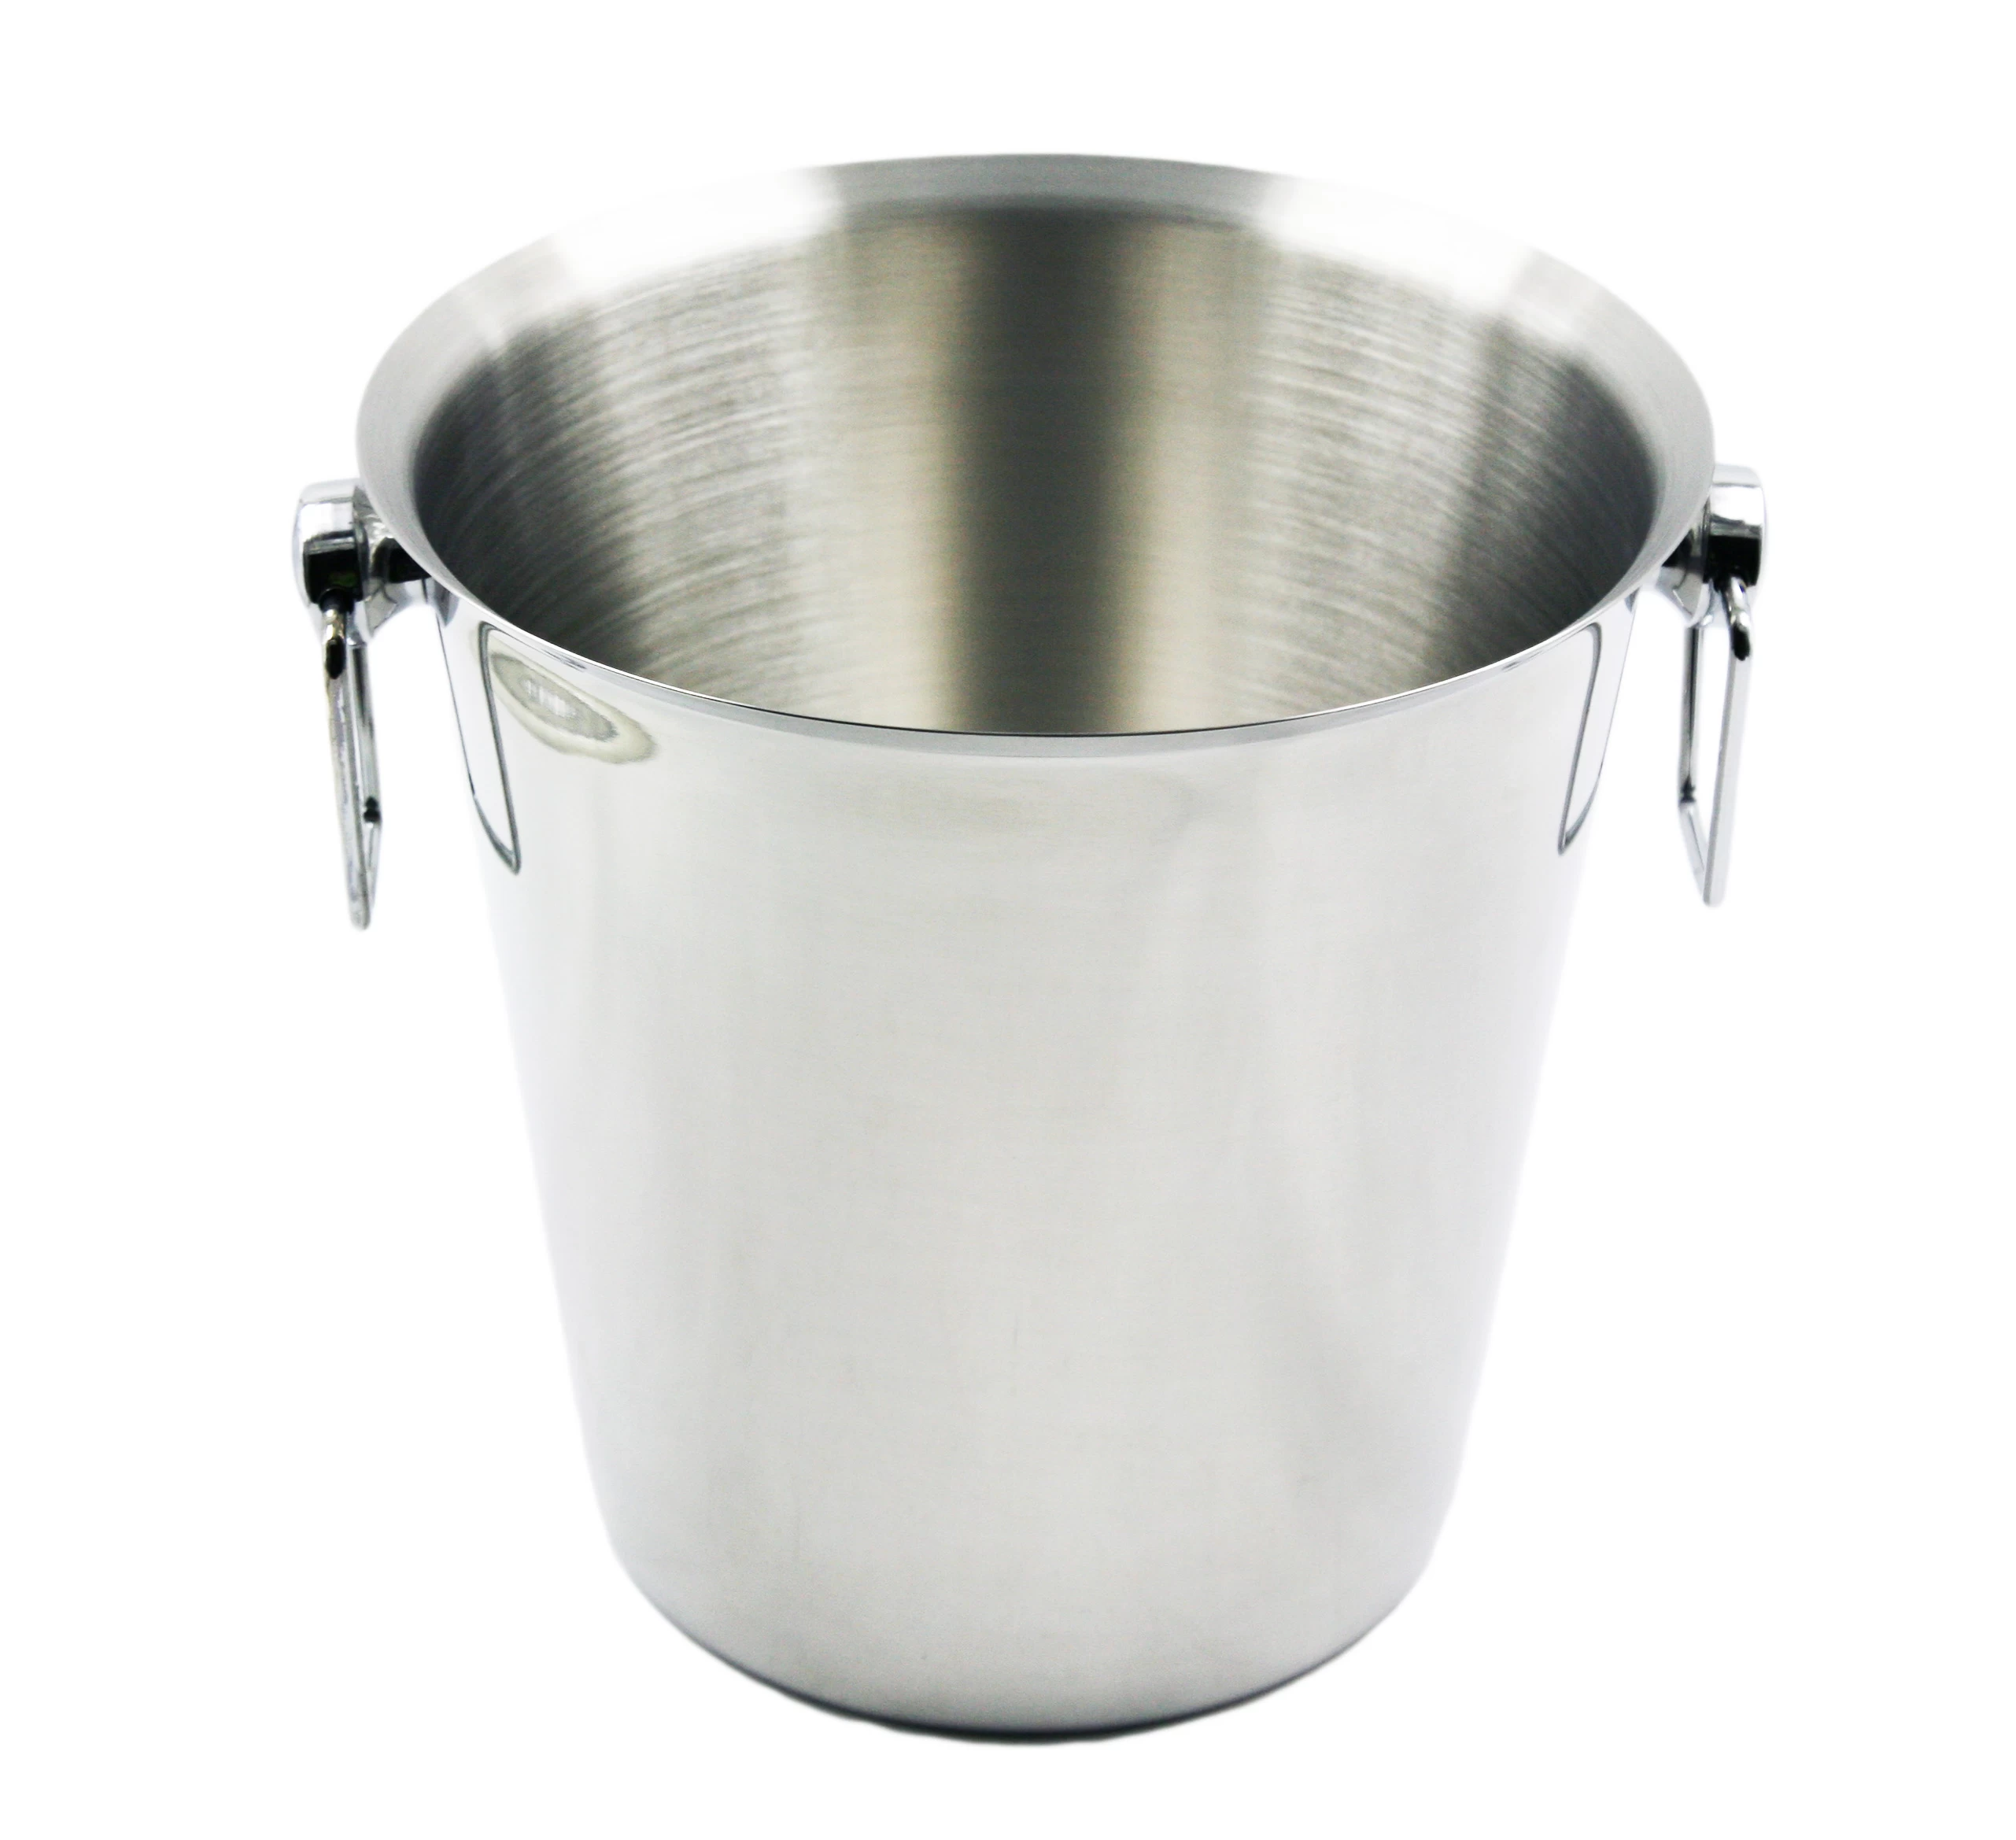 Stainless Steel Ice Bucket with Ring Handles Deluxe Wine Champagne Cooler EB-BC66